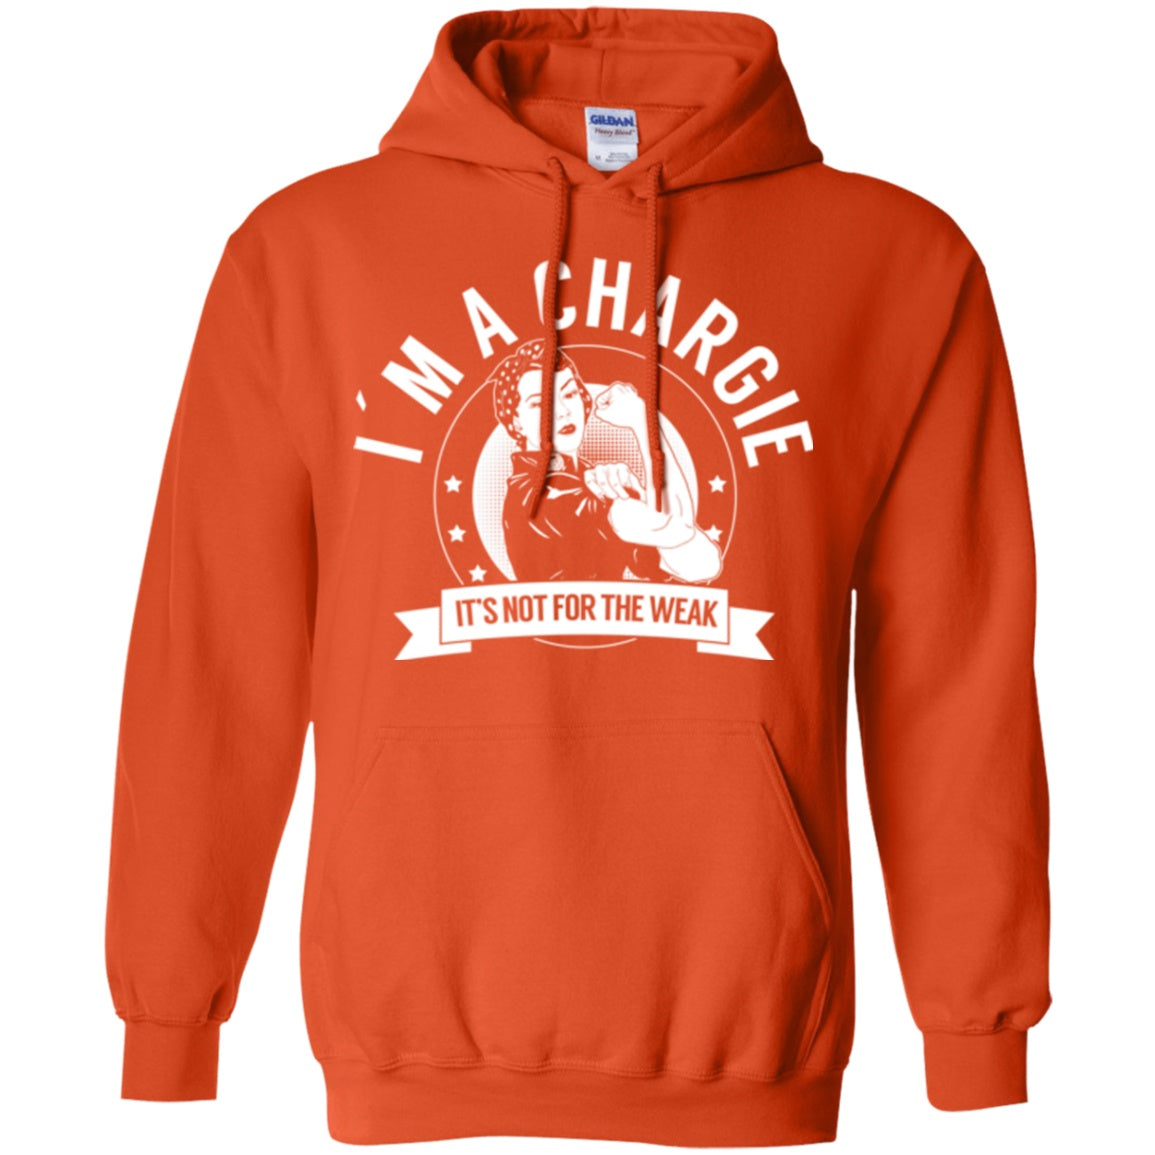 Chargie Not For The Weak Pullover Hoodie 8 oz. - The Unchargeables